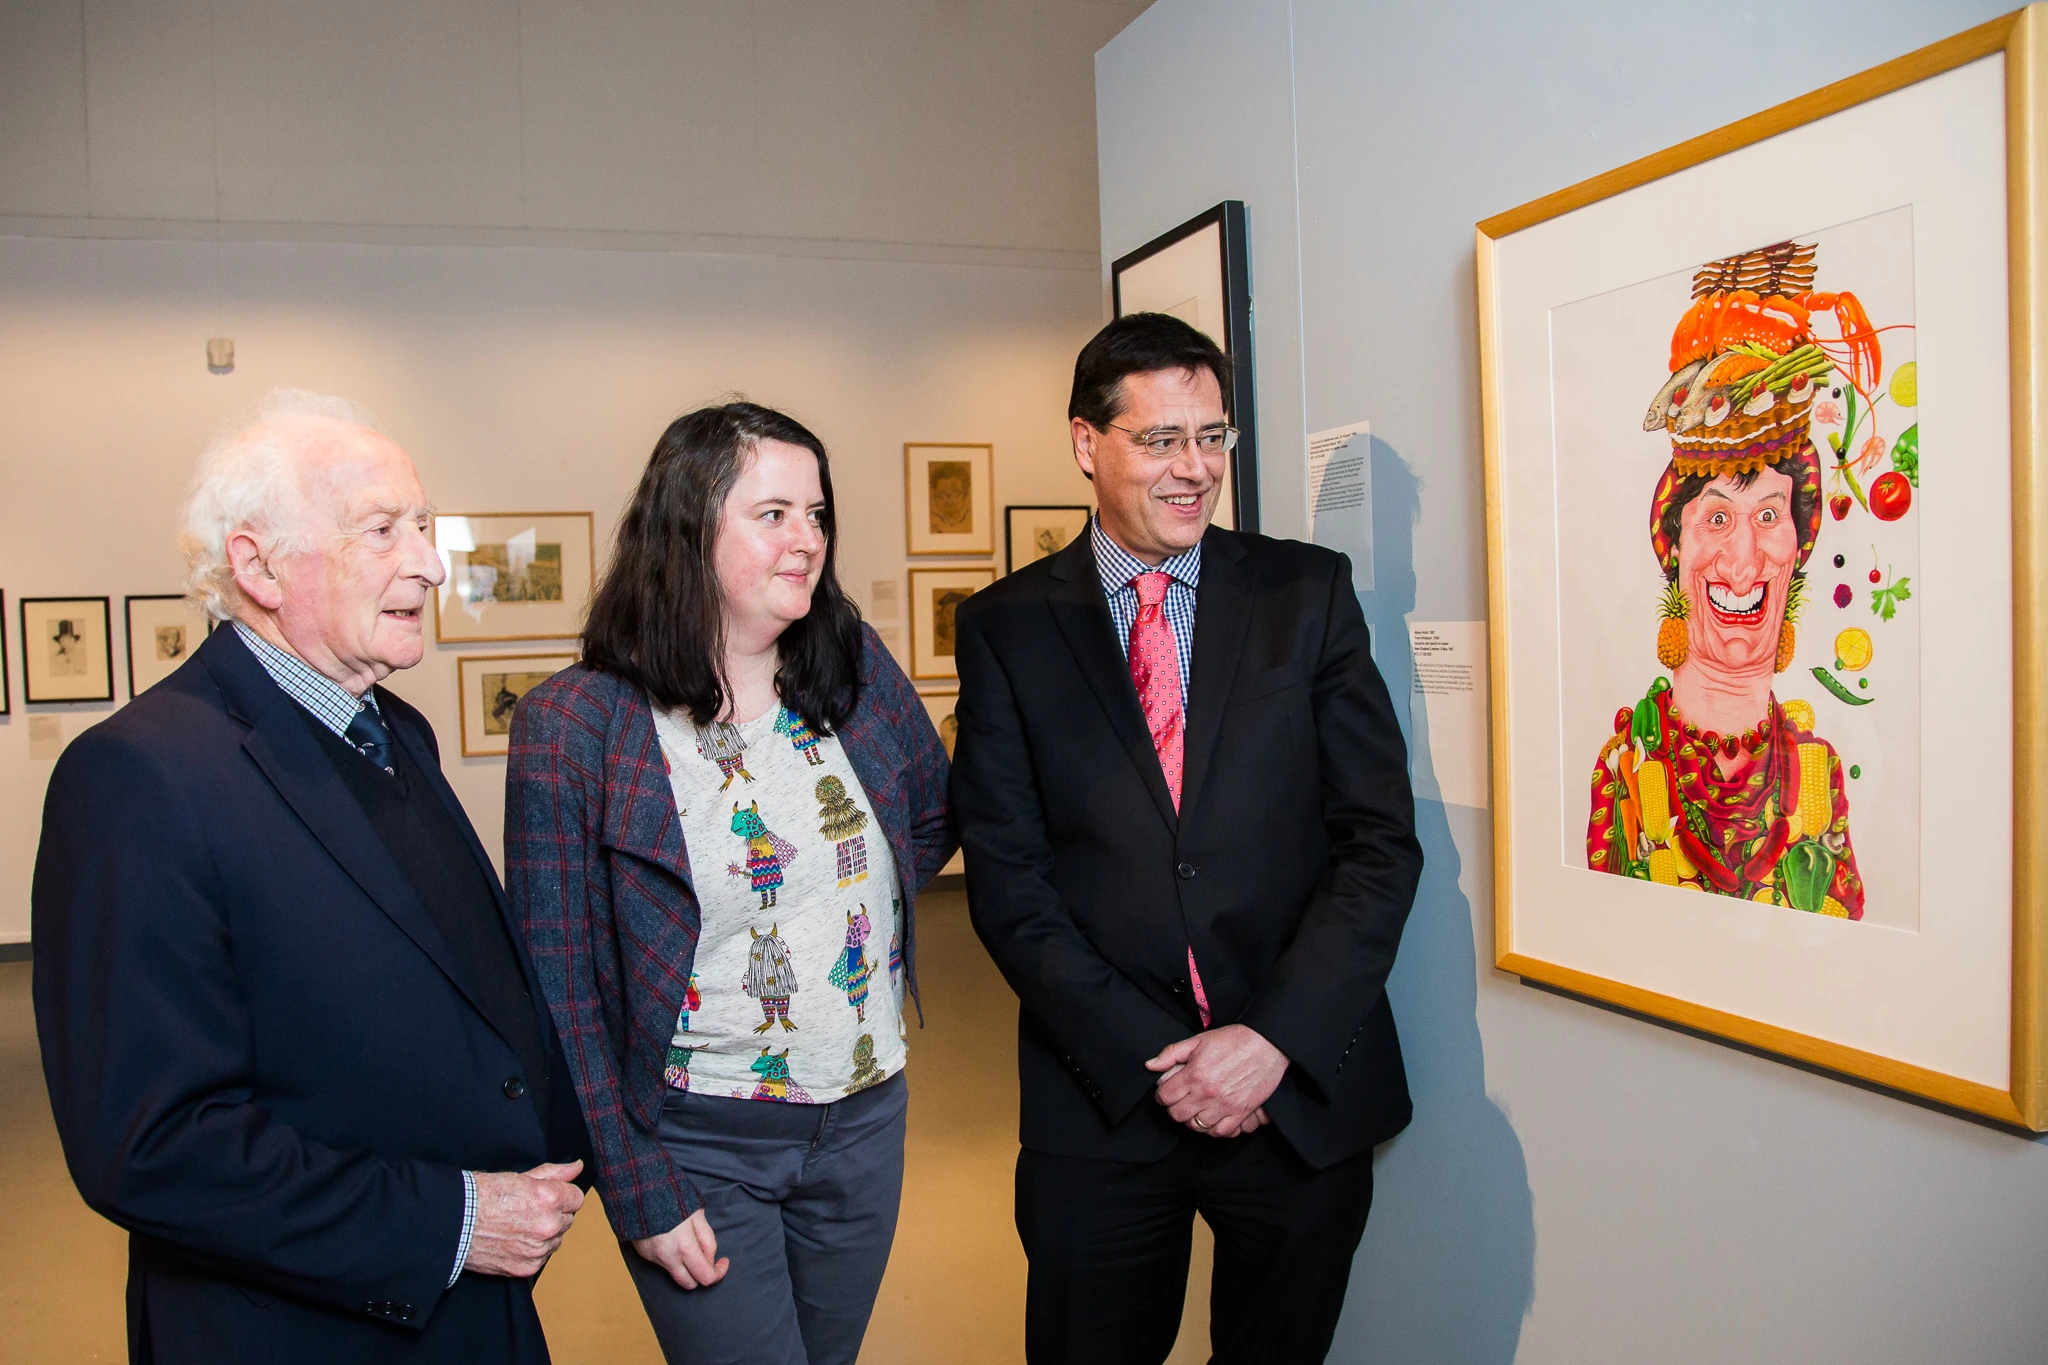 Ian Grant, Hannah Benbow and Oliver Stead standing in front of a framed caricature of Helen Clark.